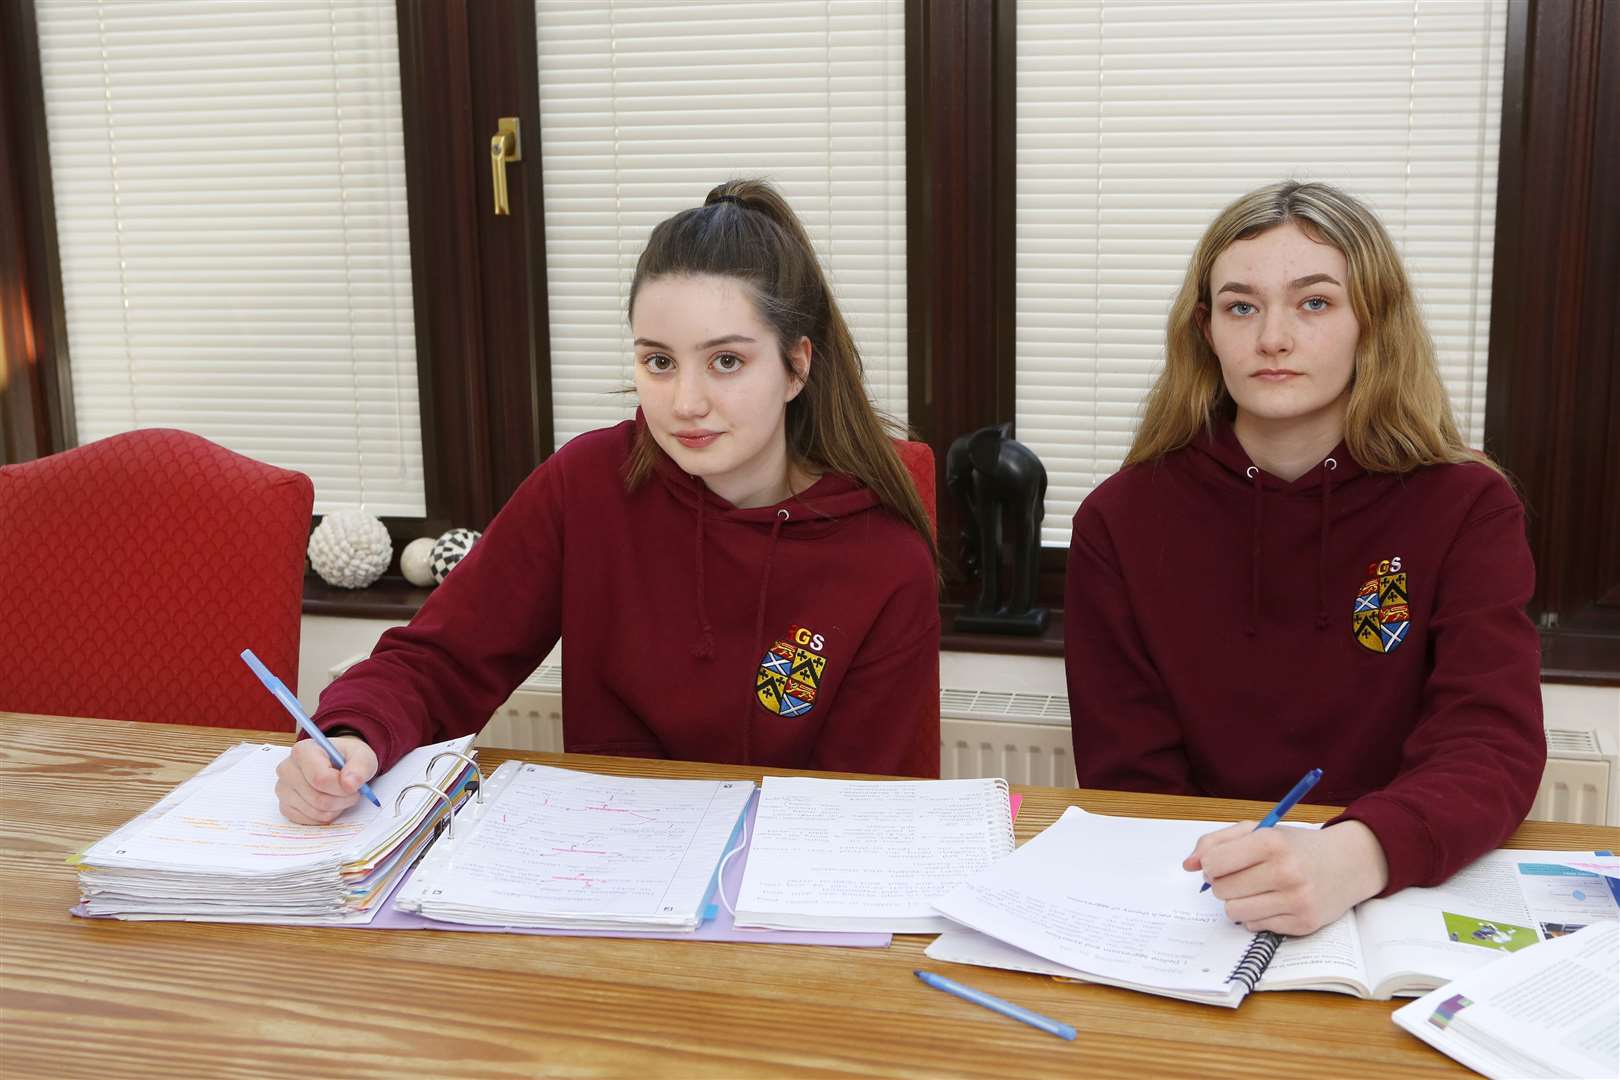 Alexandra Mcdonald and Maddie Colley have been excluded from school for allegedly putting nuts outside a teachers classroom,